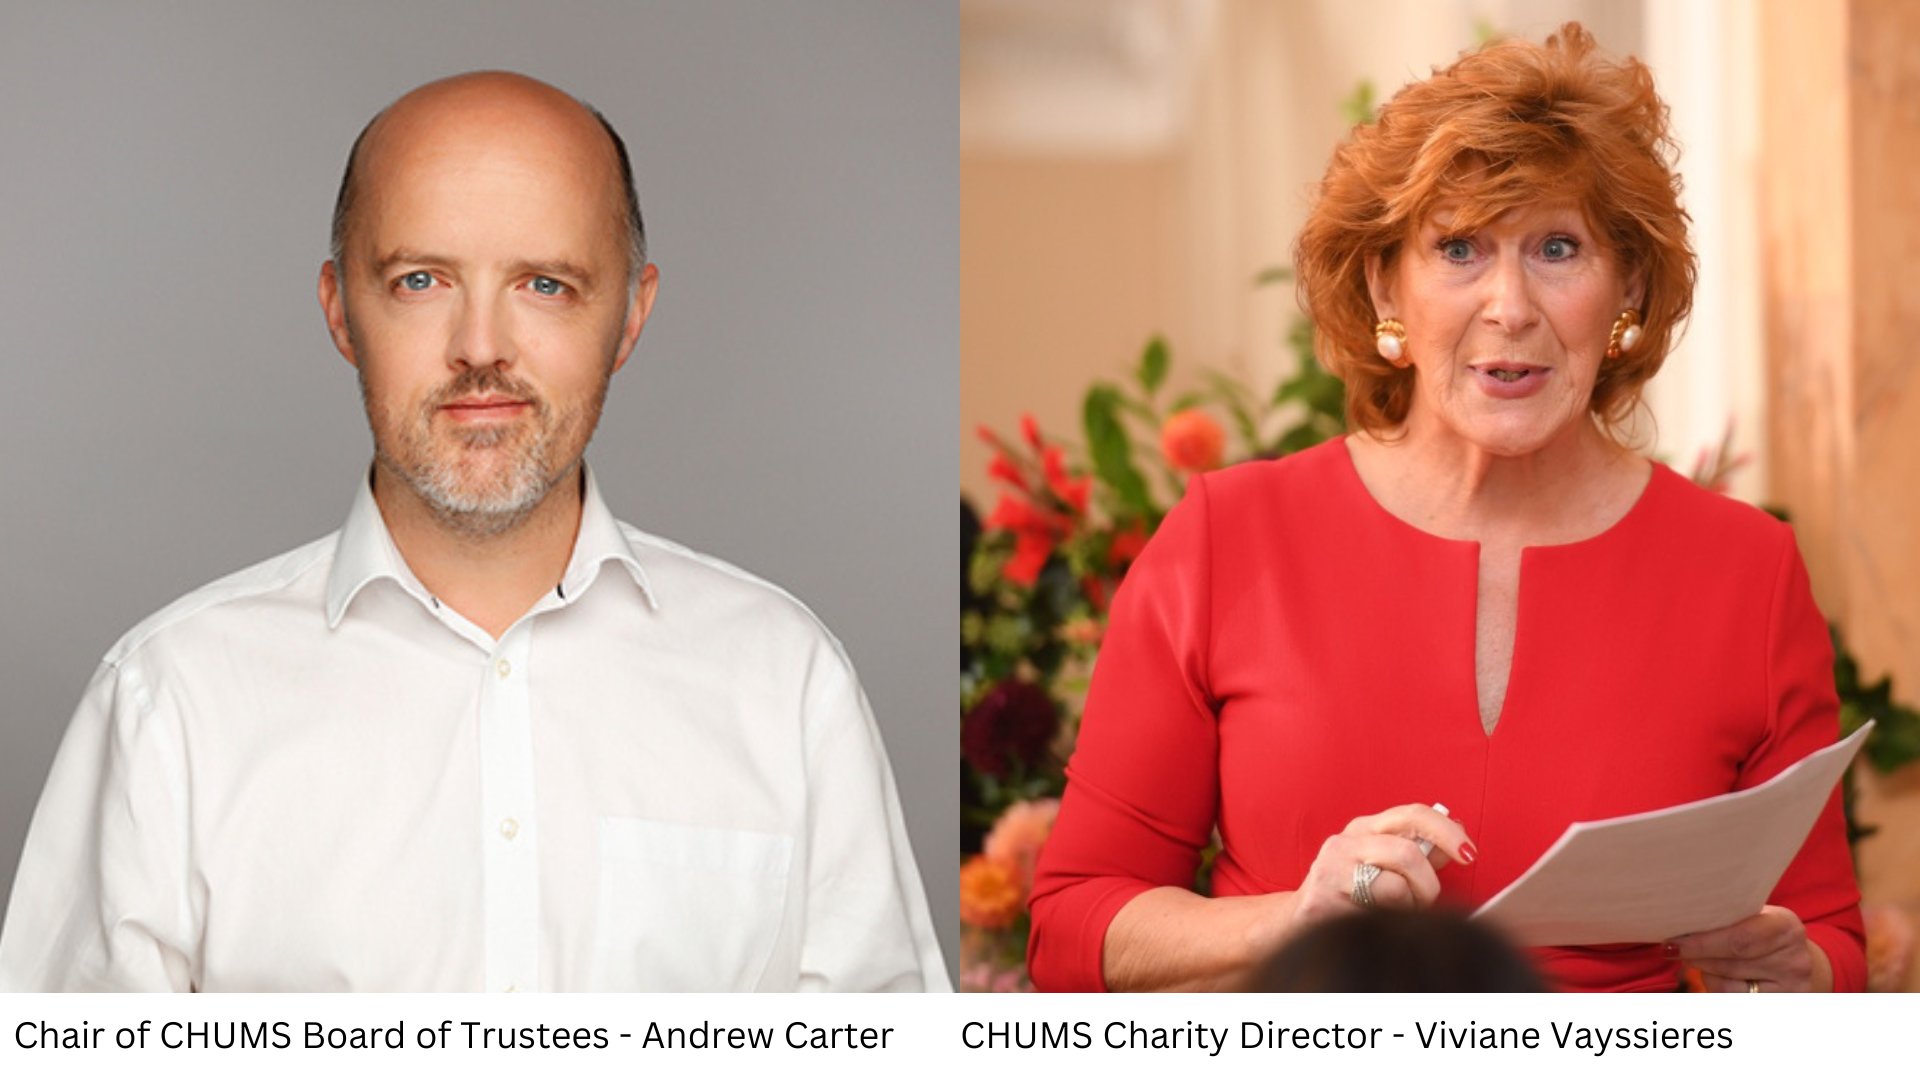 L-R Chair of CHUMS Board of Trustees - Andrew Carter and CHUMS Charity Director - Viviane Vayssieres